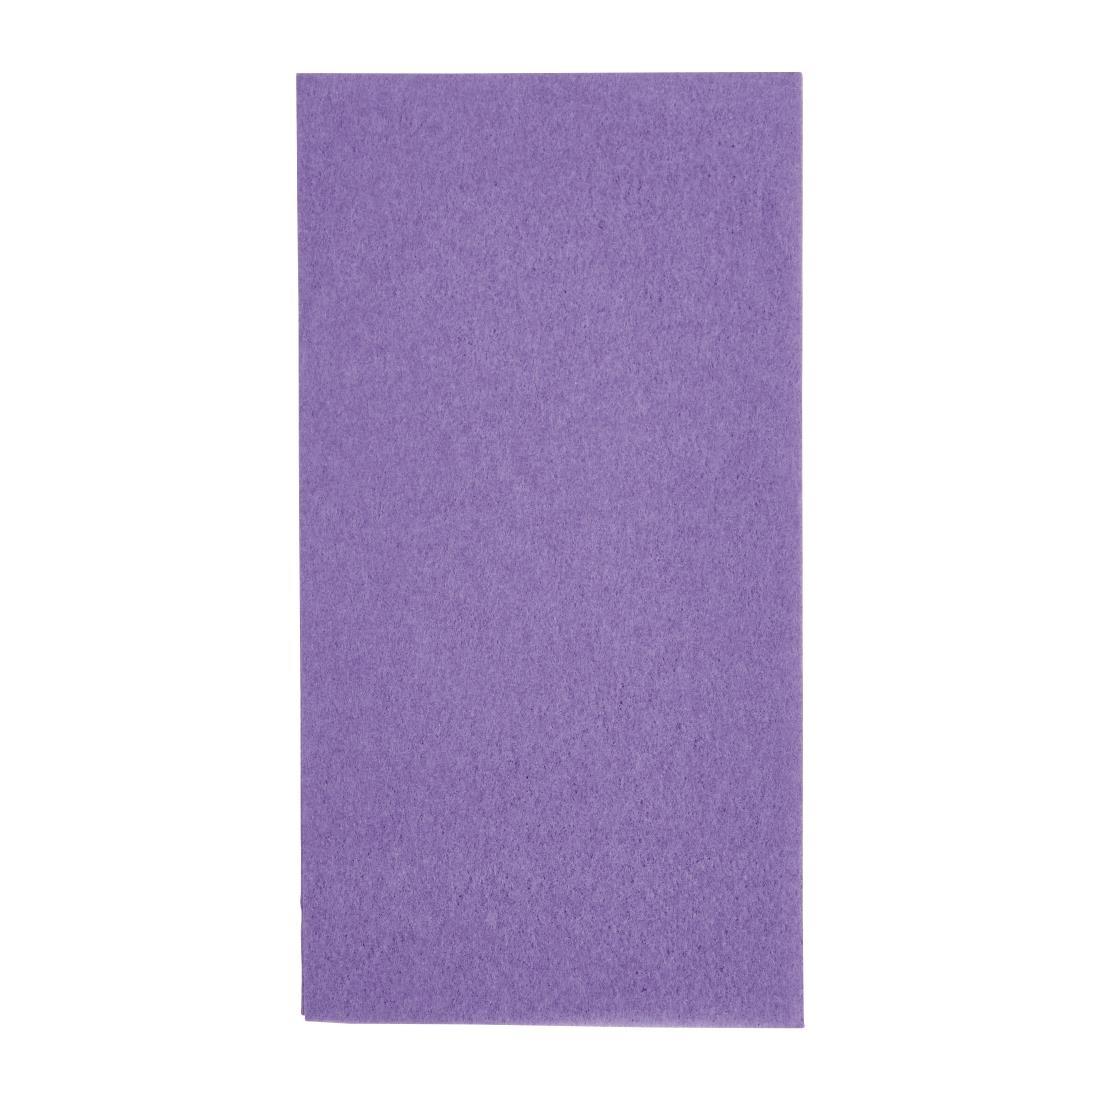 Fiesta Recyclable Lunch Napkin Plum 33x33cm 2ply 1/8 Fold (Pack of 2000) - FE232  - 1